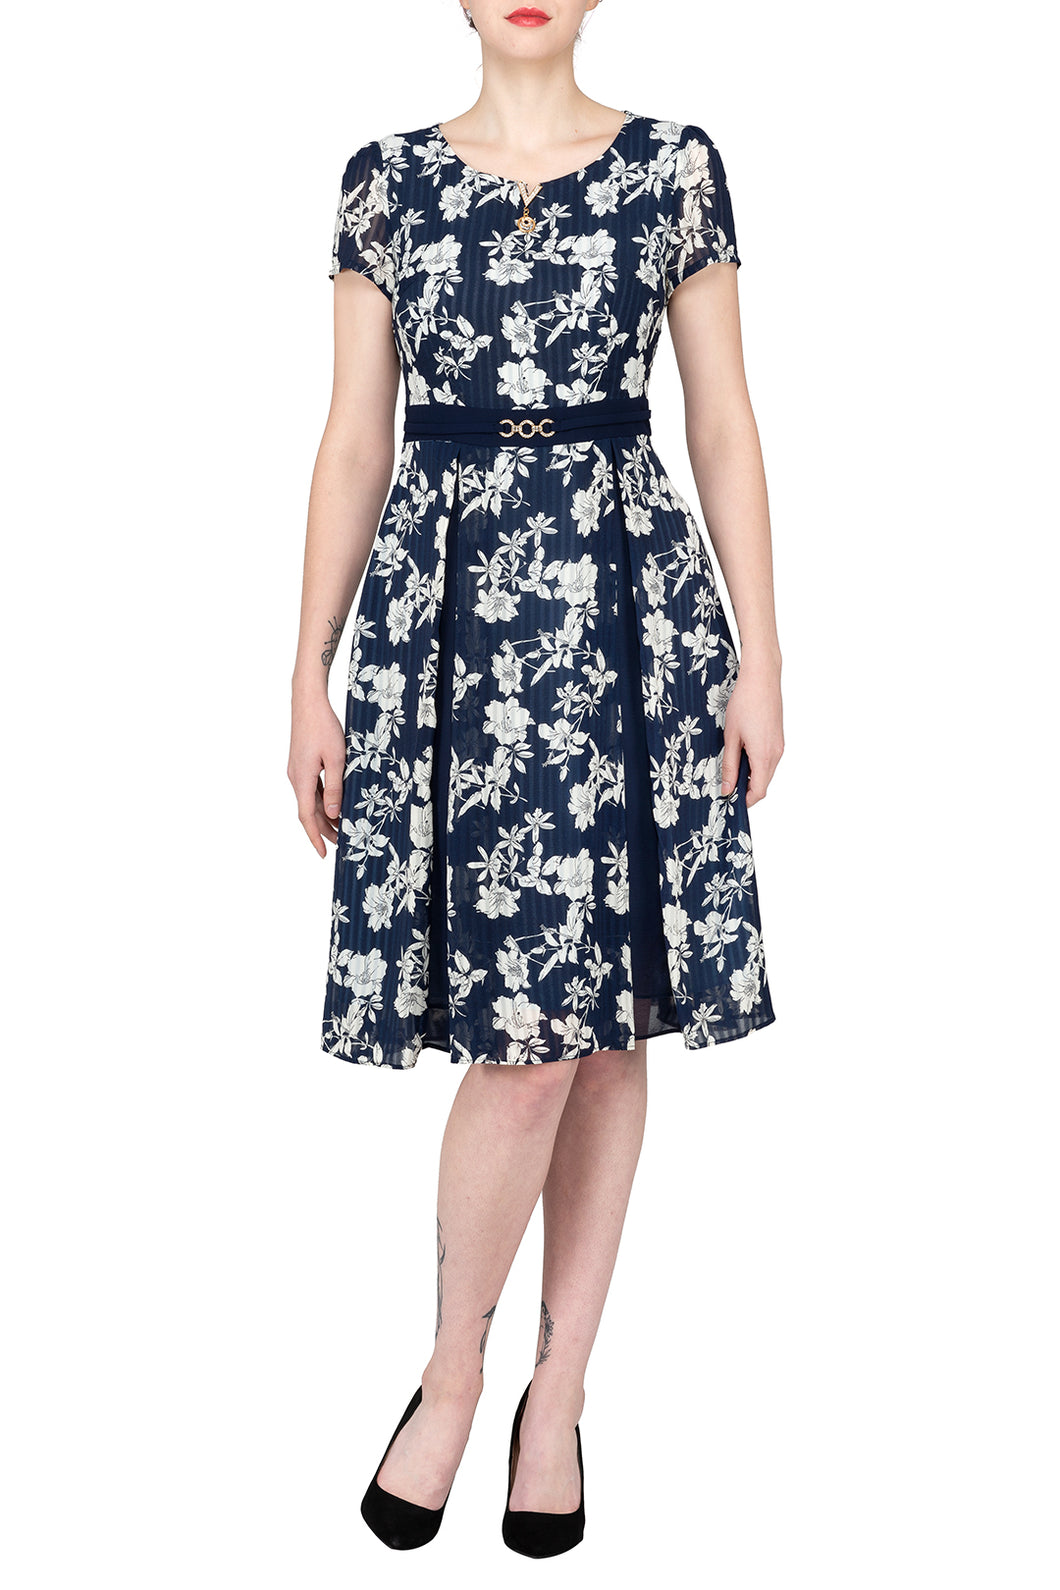 TWO PEARS-Floral A Line Pleated Dress